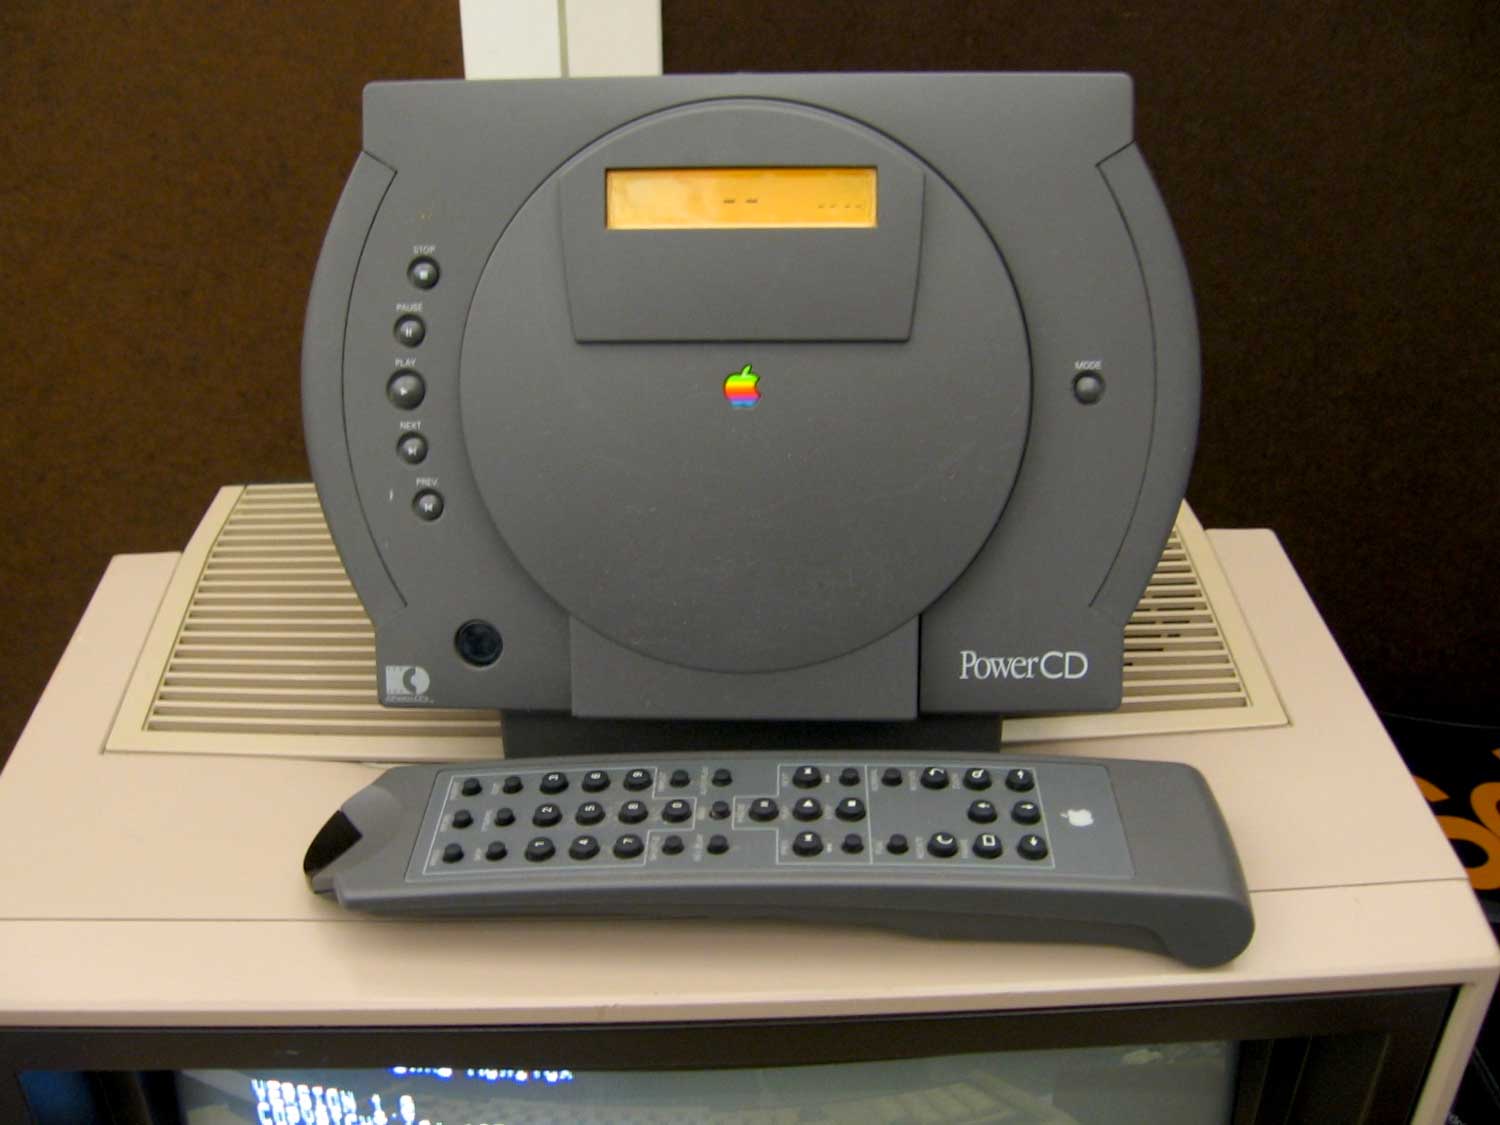 Apple PowerCD: Remembering Apple's Failed Portable CD Player